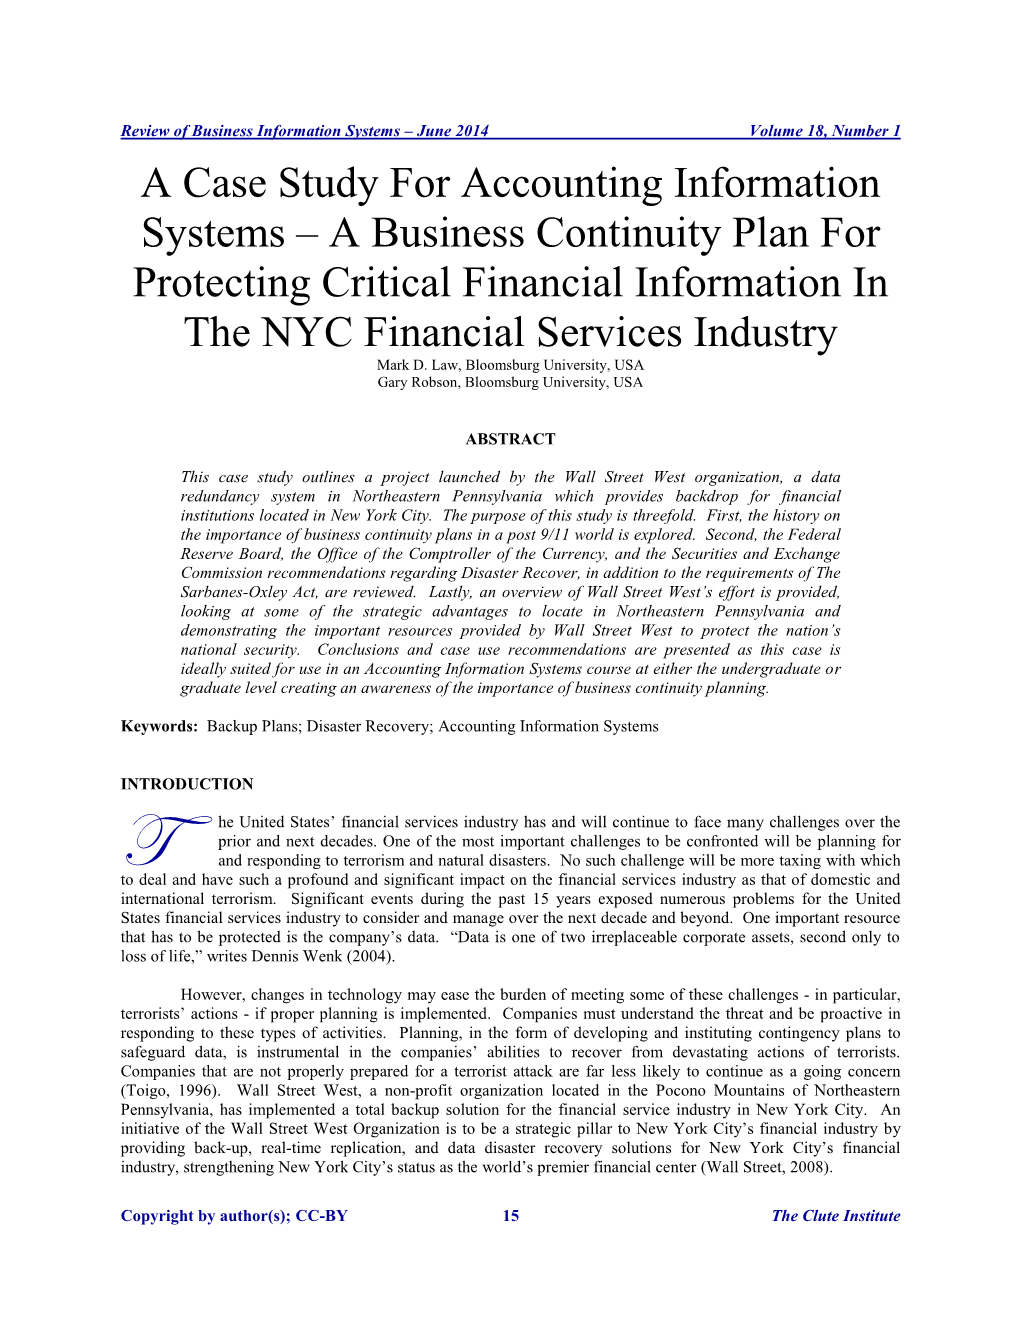 A Case Study for Accounting Information Systems